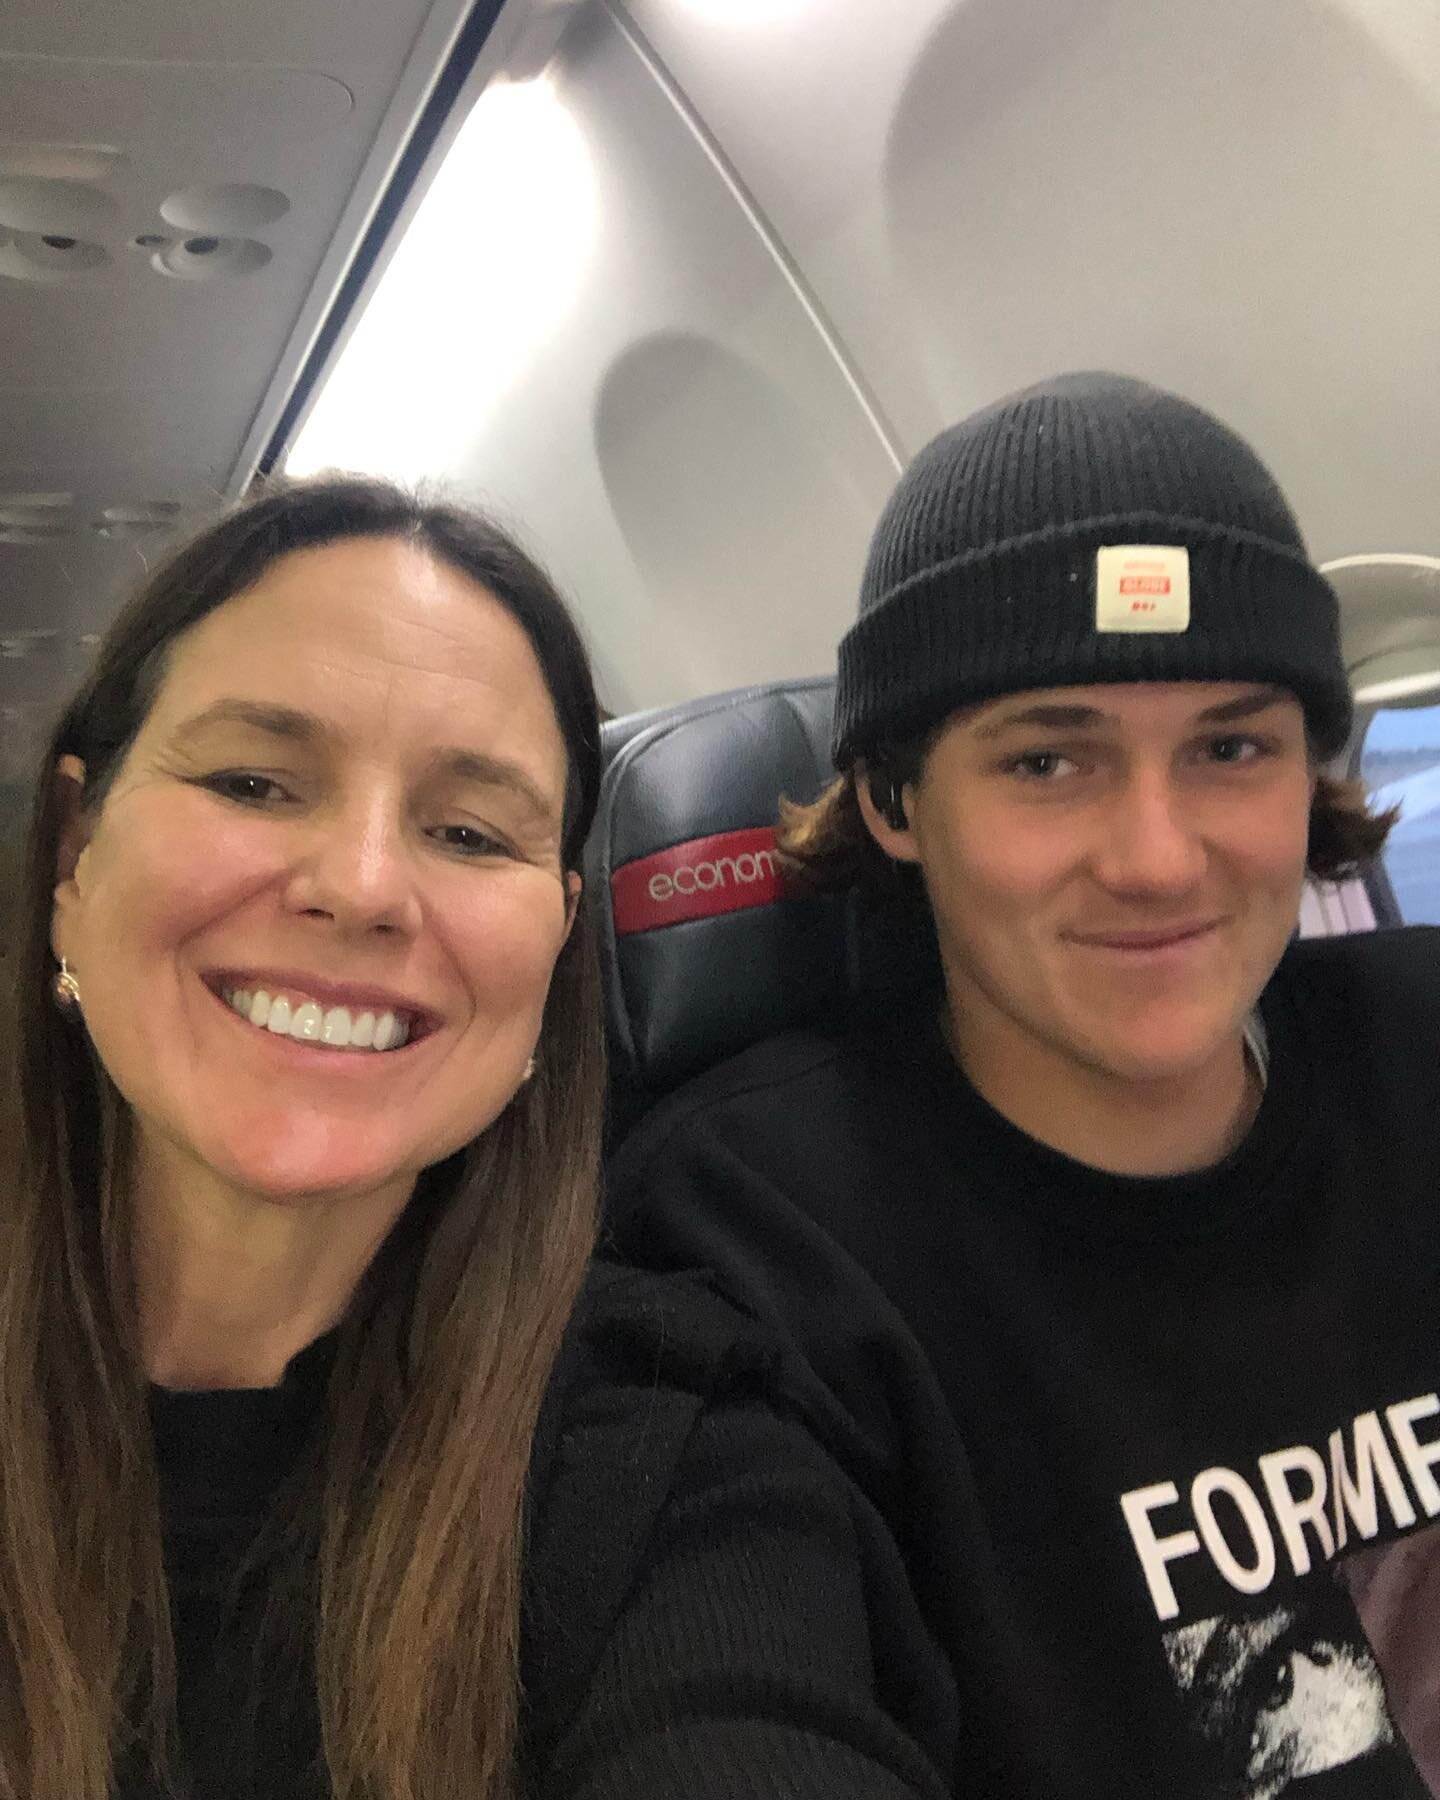 HSC Trials are over &amp; this gorgeous boy &amp; I are on our way to Noosa (via Bris and a missed flight - ahhhhh) to be with @c3noosa &amp; our good friends @mccudden1 @lissy_mc77 @noah_mccudden1 @ellamccudden .
So looking forward to being with the